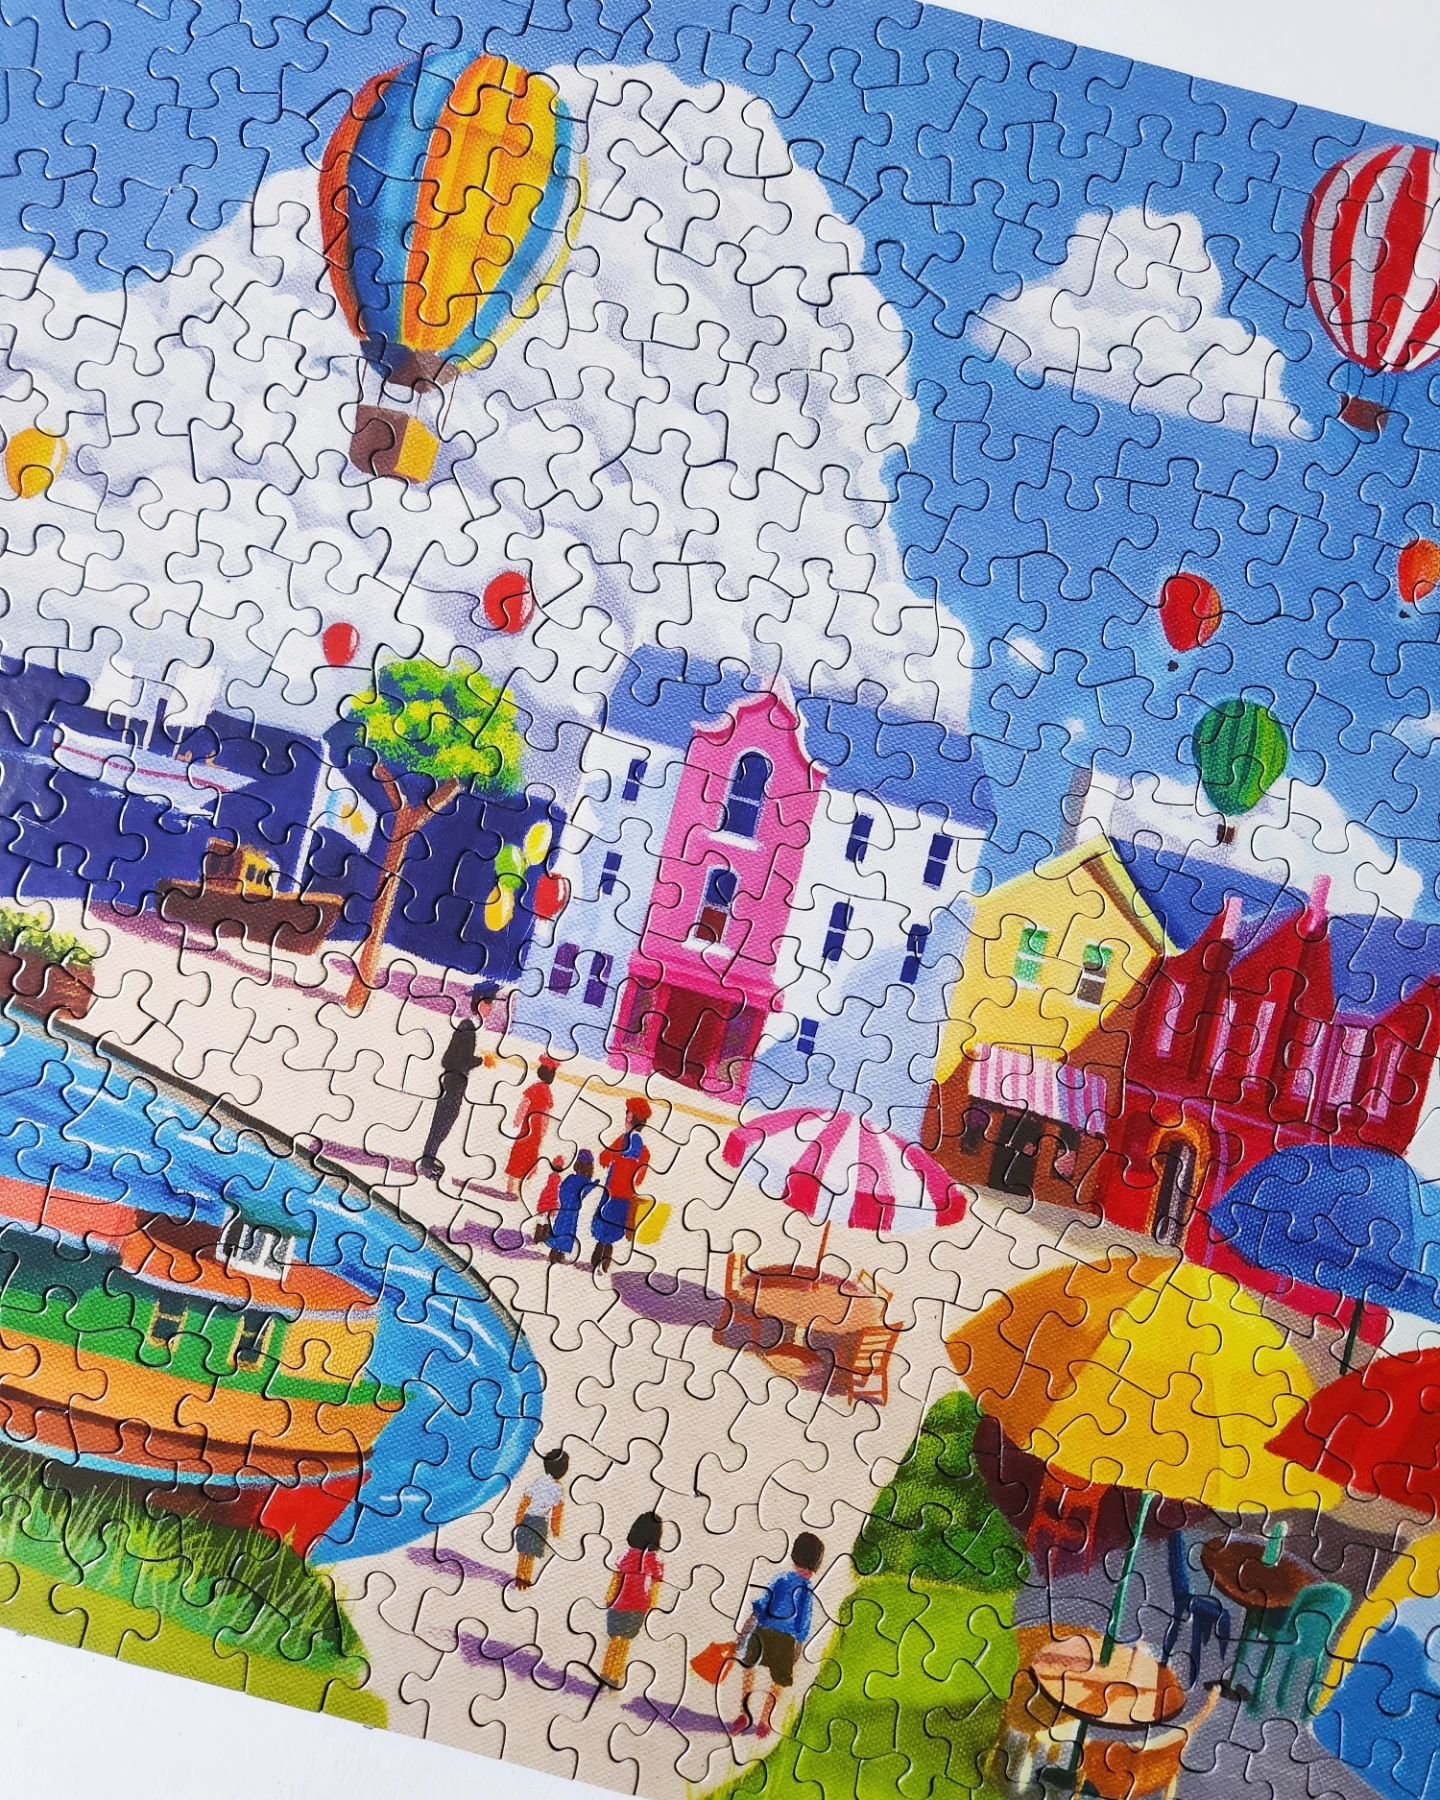 Balloon Seller 🎈🌥🪂

Here is a new, beautiful, and amazing @springbokpuzzles that was just released! This is such a fun and colorful 500-piece puzzle. It's perfect for the spring and summer!

I loved every element of this puzzle. The whole puzzle i